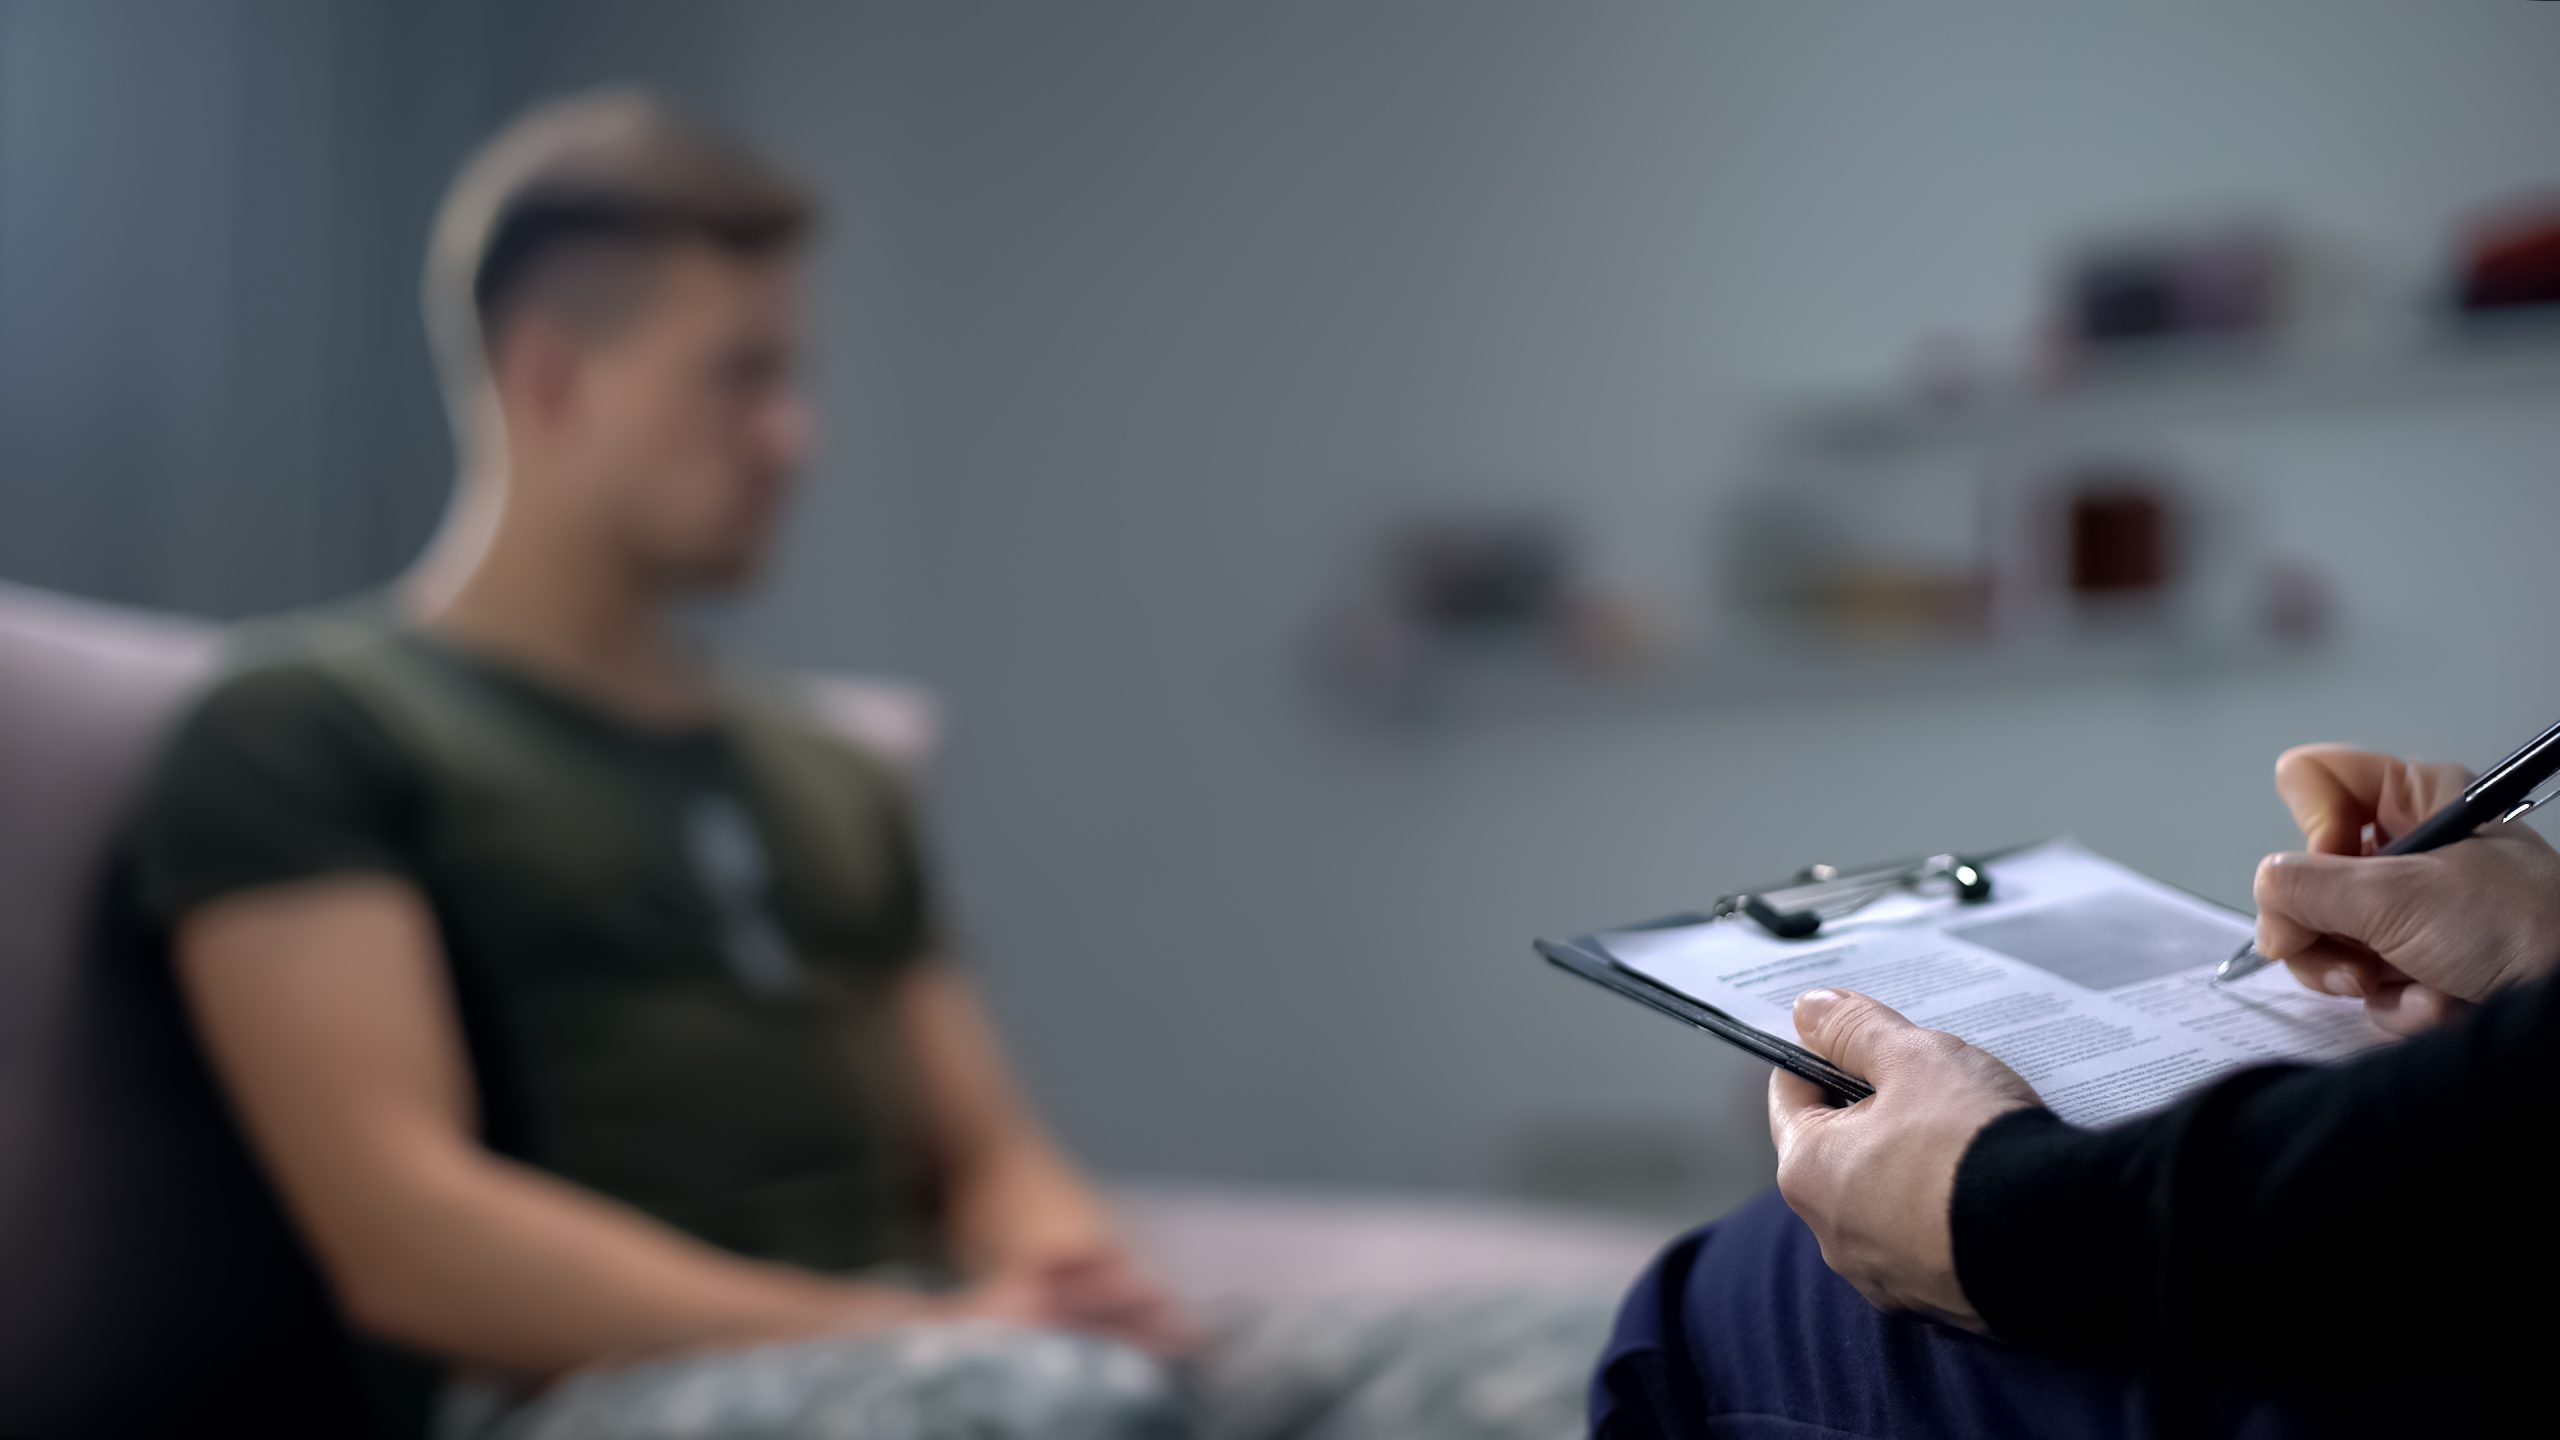 A person, seated and blurred in the background, appears to be having a discussion. In the foreground, another person holds a clipboard and pen, taking notes. The setting suggests a professional conversation likely taking place in a trauma clinic specializing in PTSD treatment.